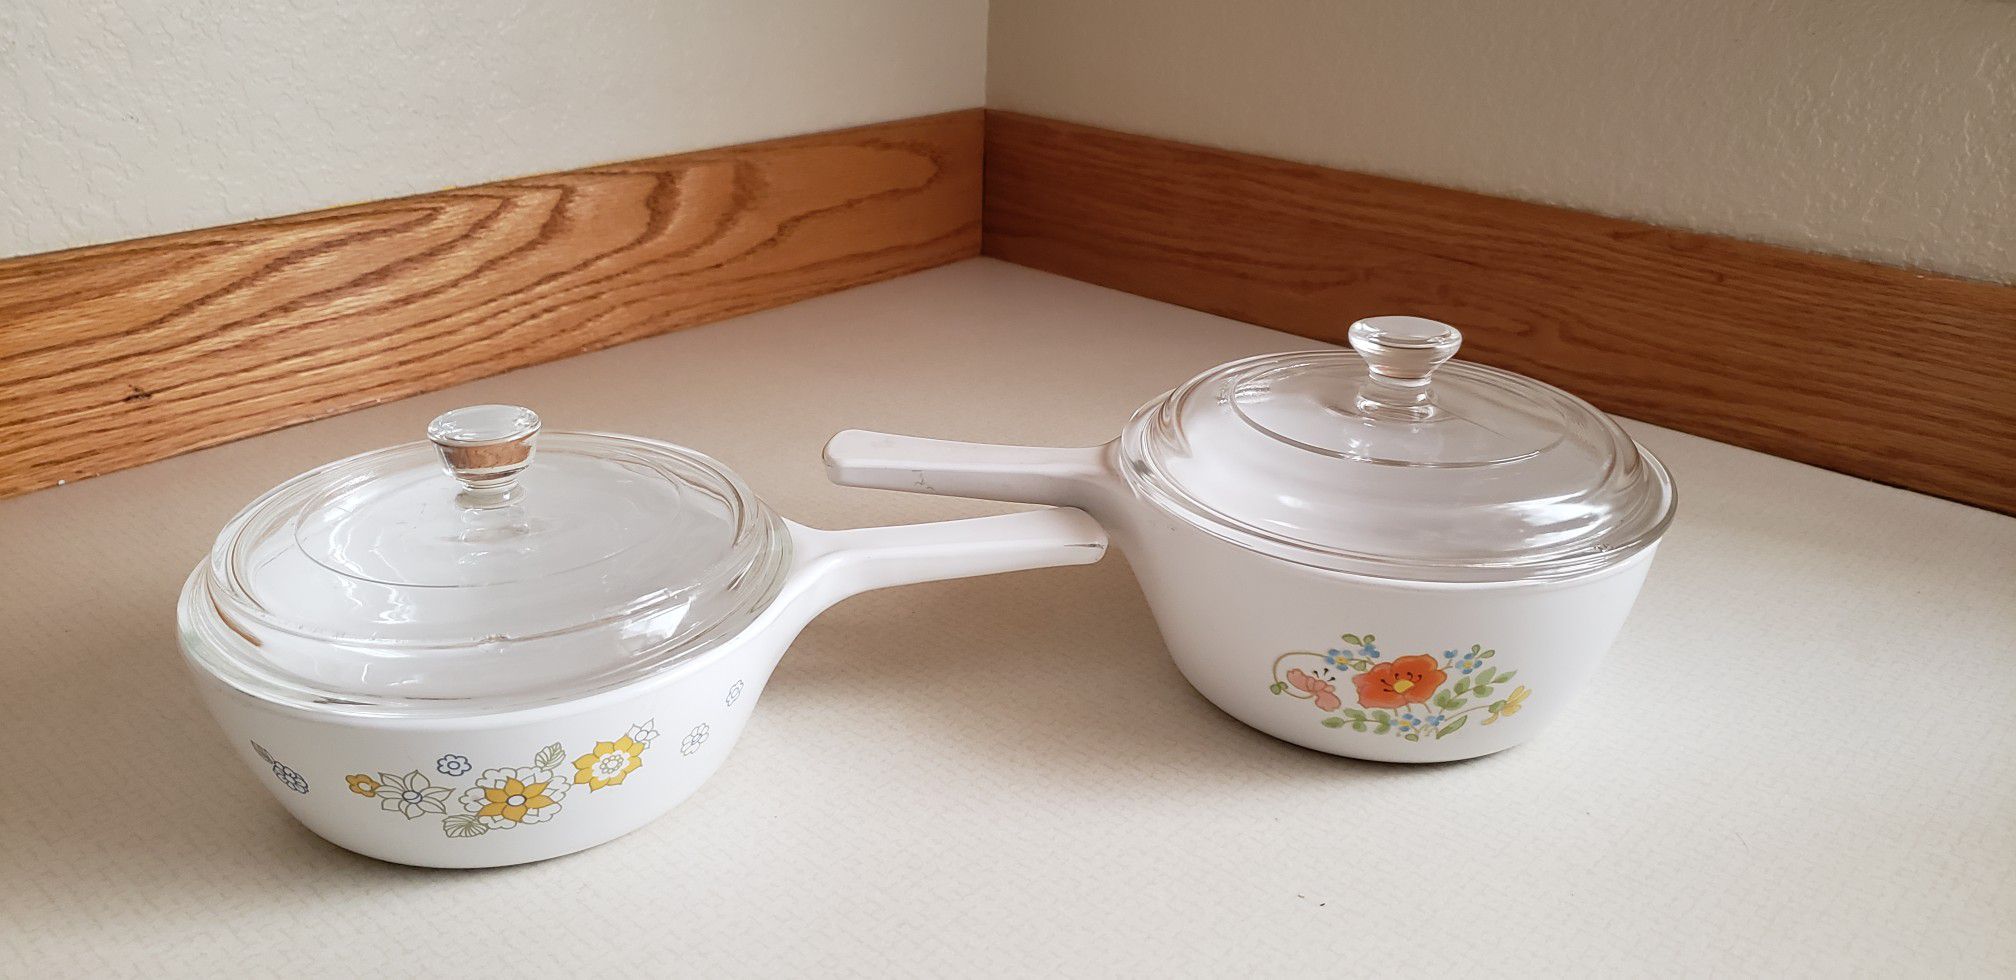 Two vintage Corning ware with lids